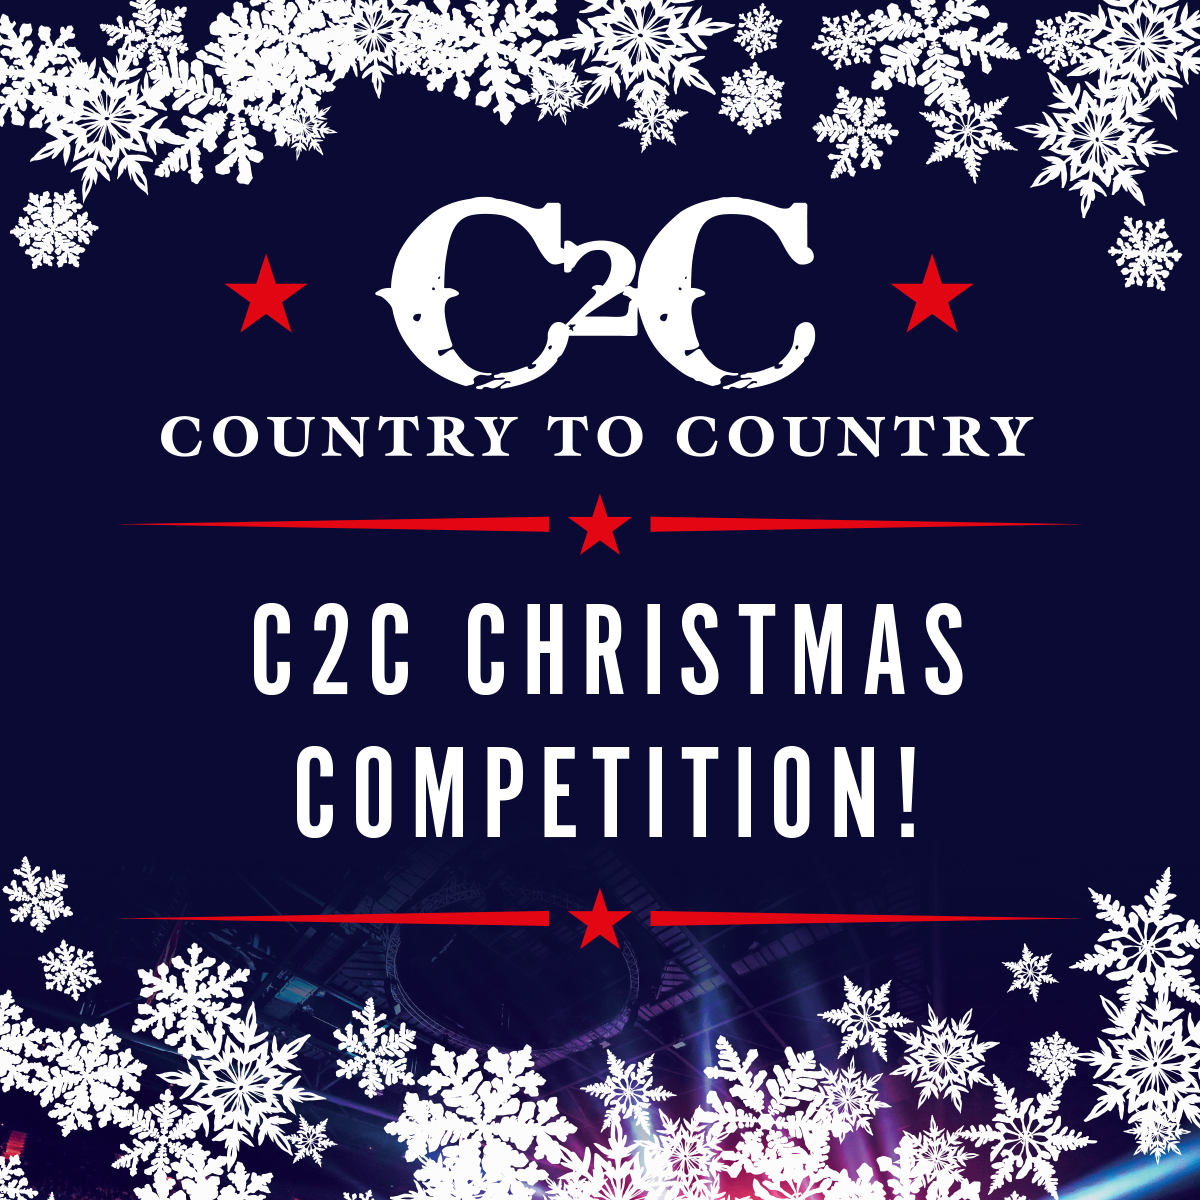 Fancy winning a HUGE C2C Christmas Prize? Including Keith Urban tickets, beer & gin from @signalbeerco, Western boots from @AriatEurope, Brad Paisley tickets, C2C merch, Midland tickets, Official C2C After Show tickets & more! Enter via the C2C App! https://t.co/rJiGoM3YZl https://t.co/cCZTFDELol